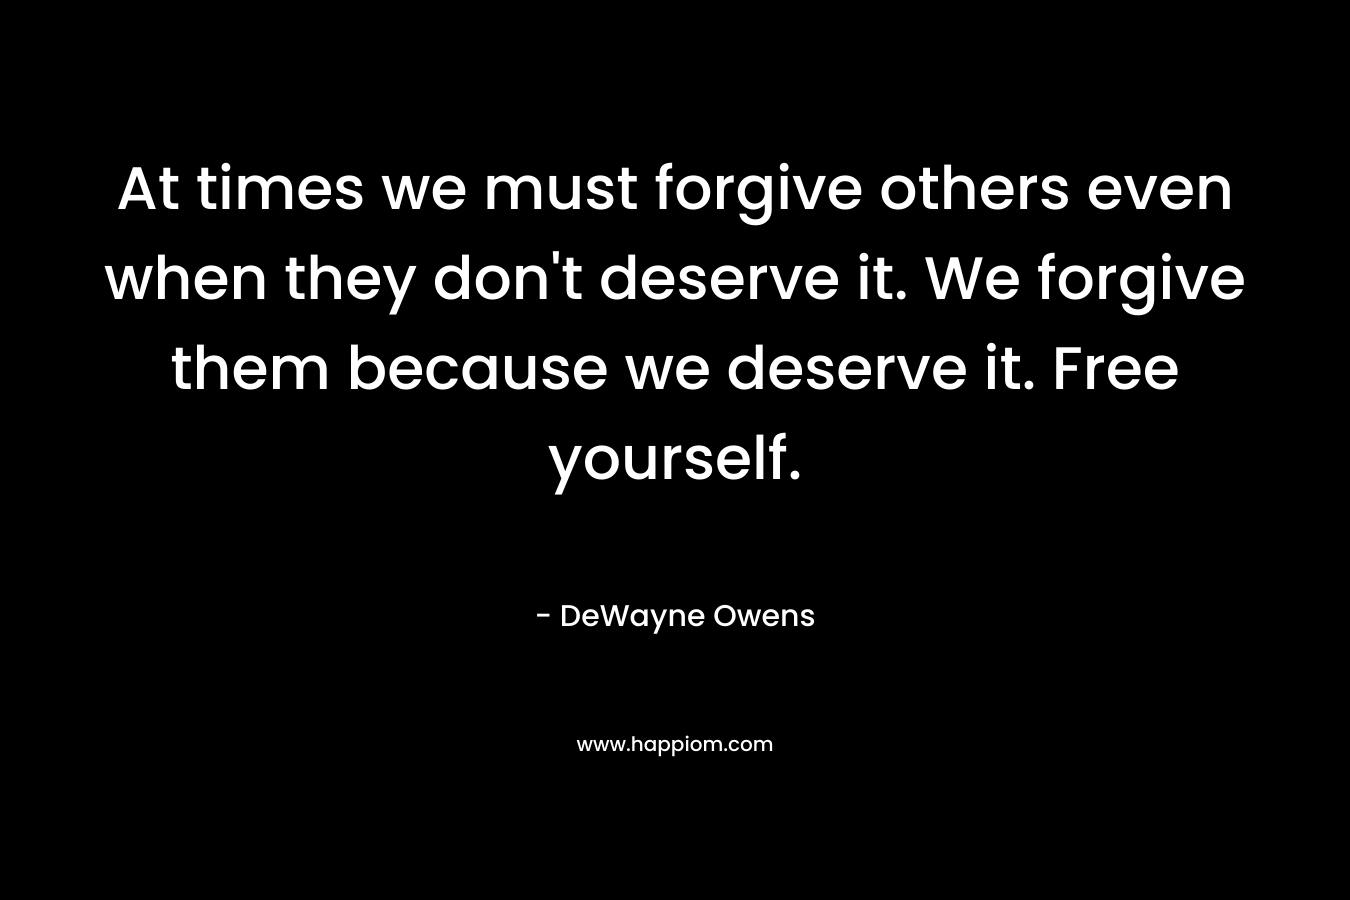 At times we must forgive others even when they don’t deserve it. We forgive them because we deserve it. Free yourself. – DeWayne Owens